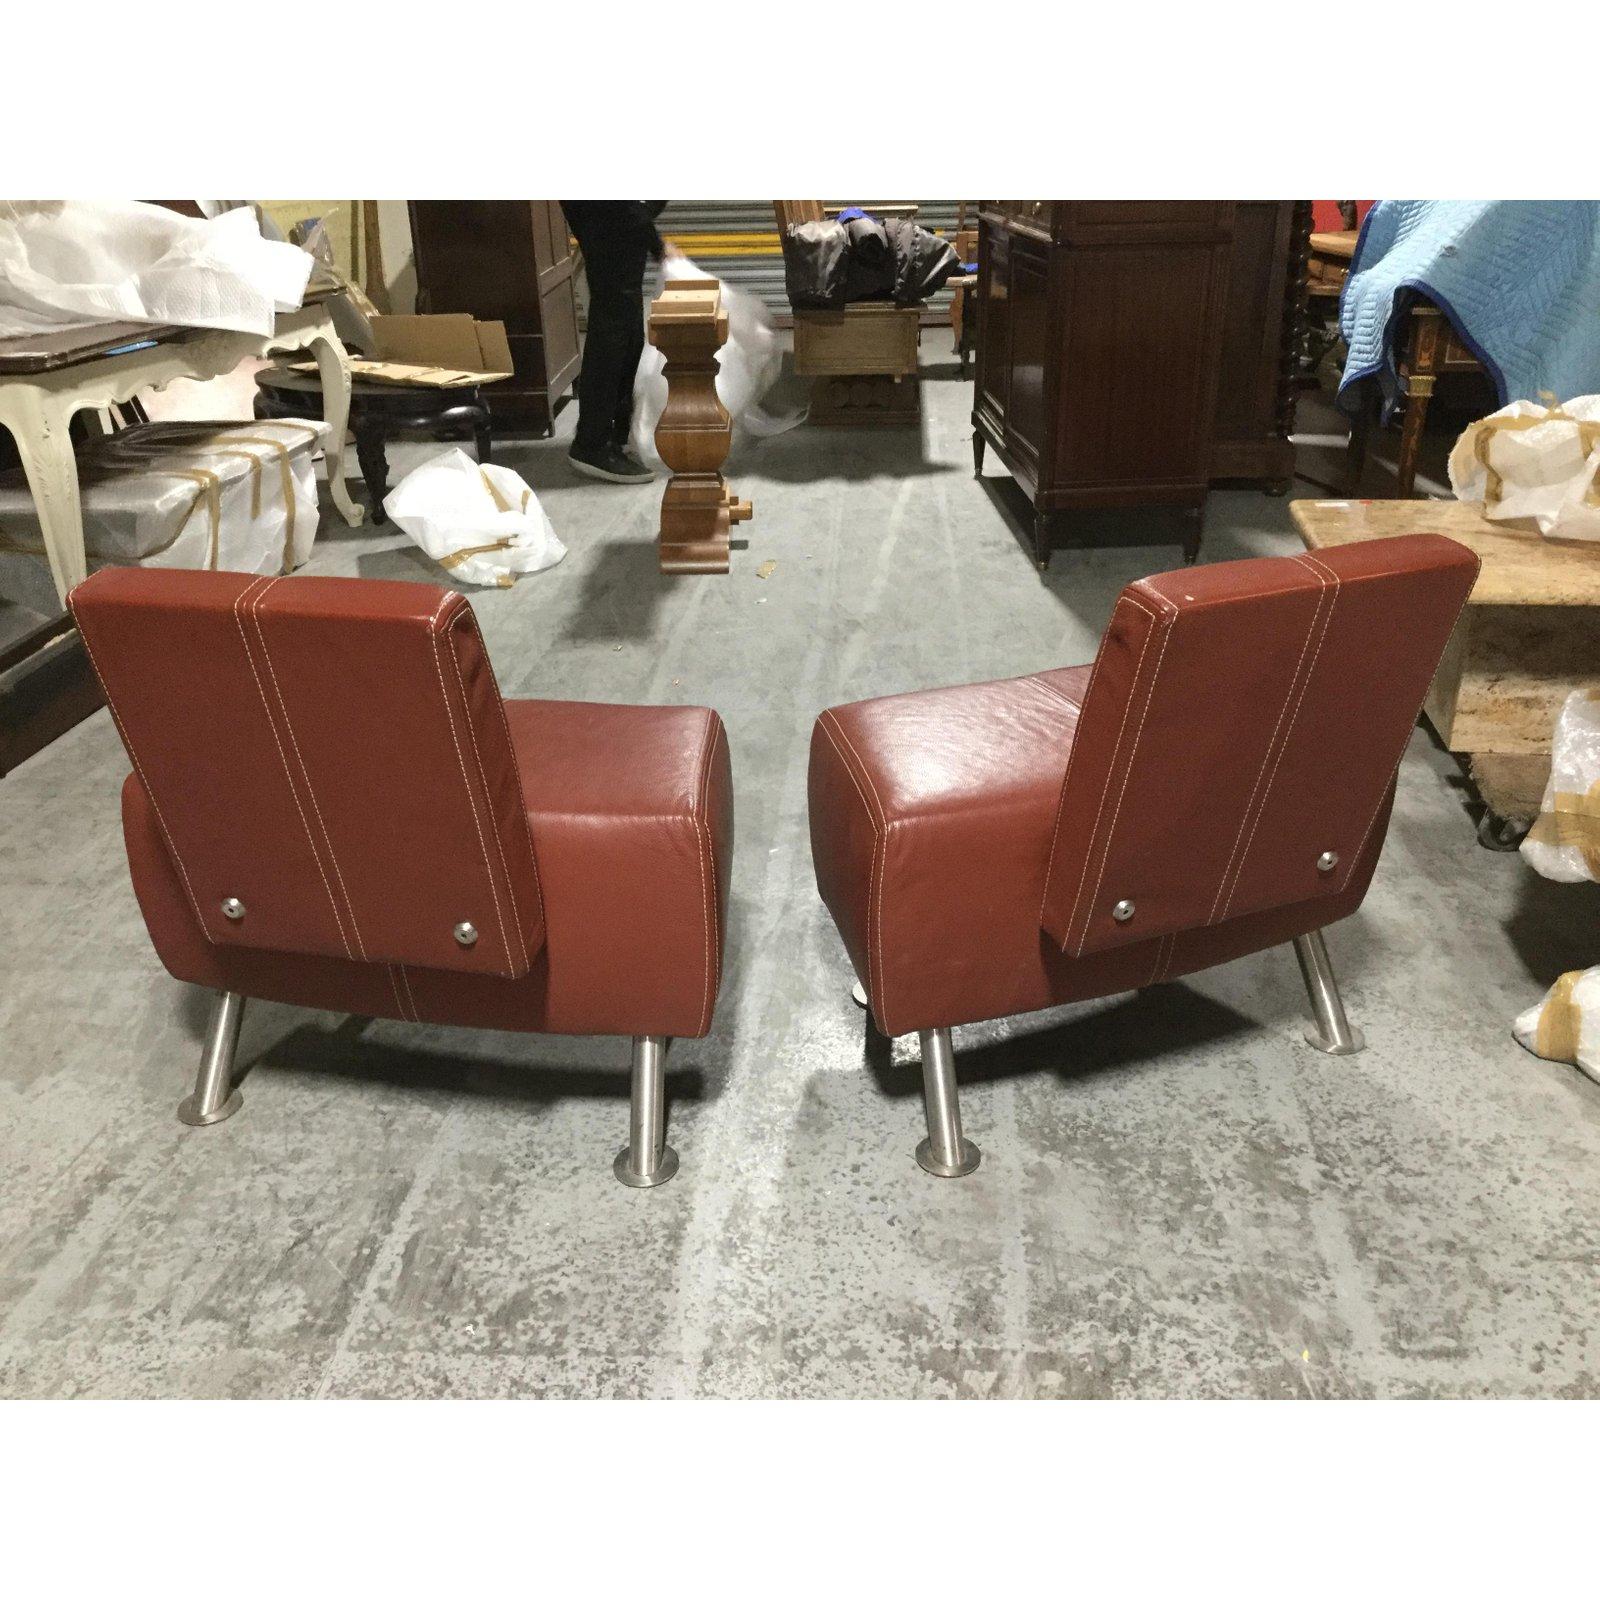 Chic Italian Industrial Leather Salon Set with Two Chairs and Loveseat 1